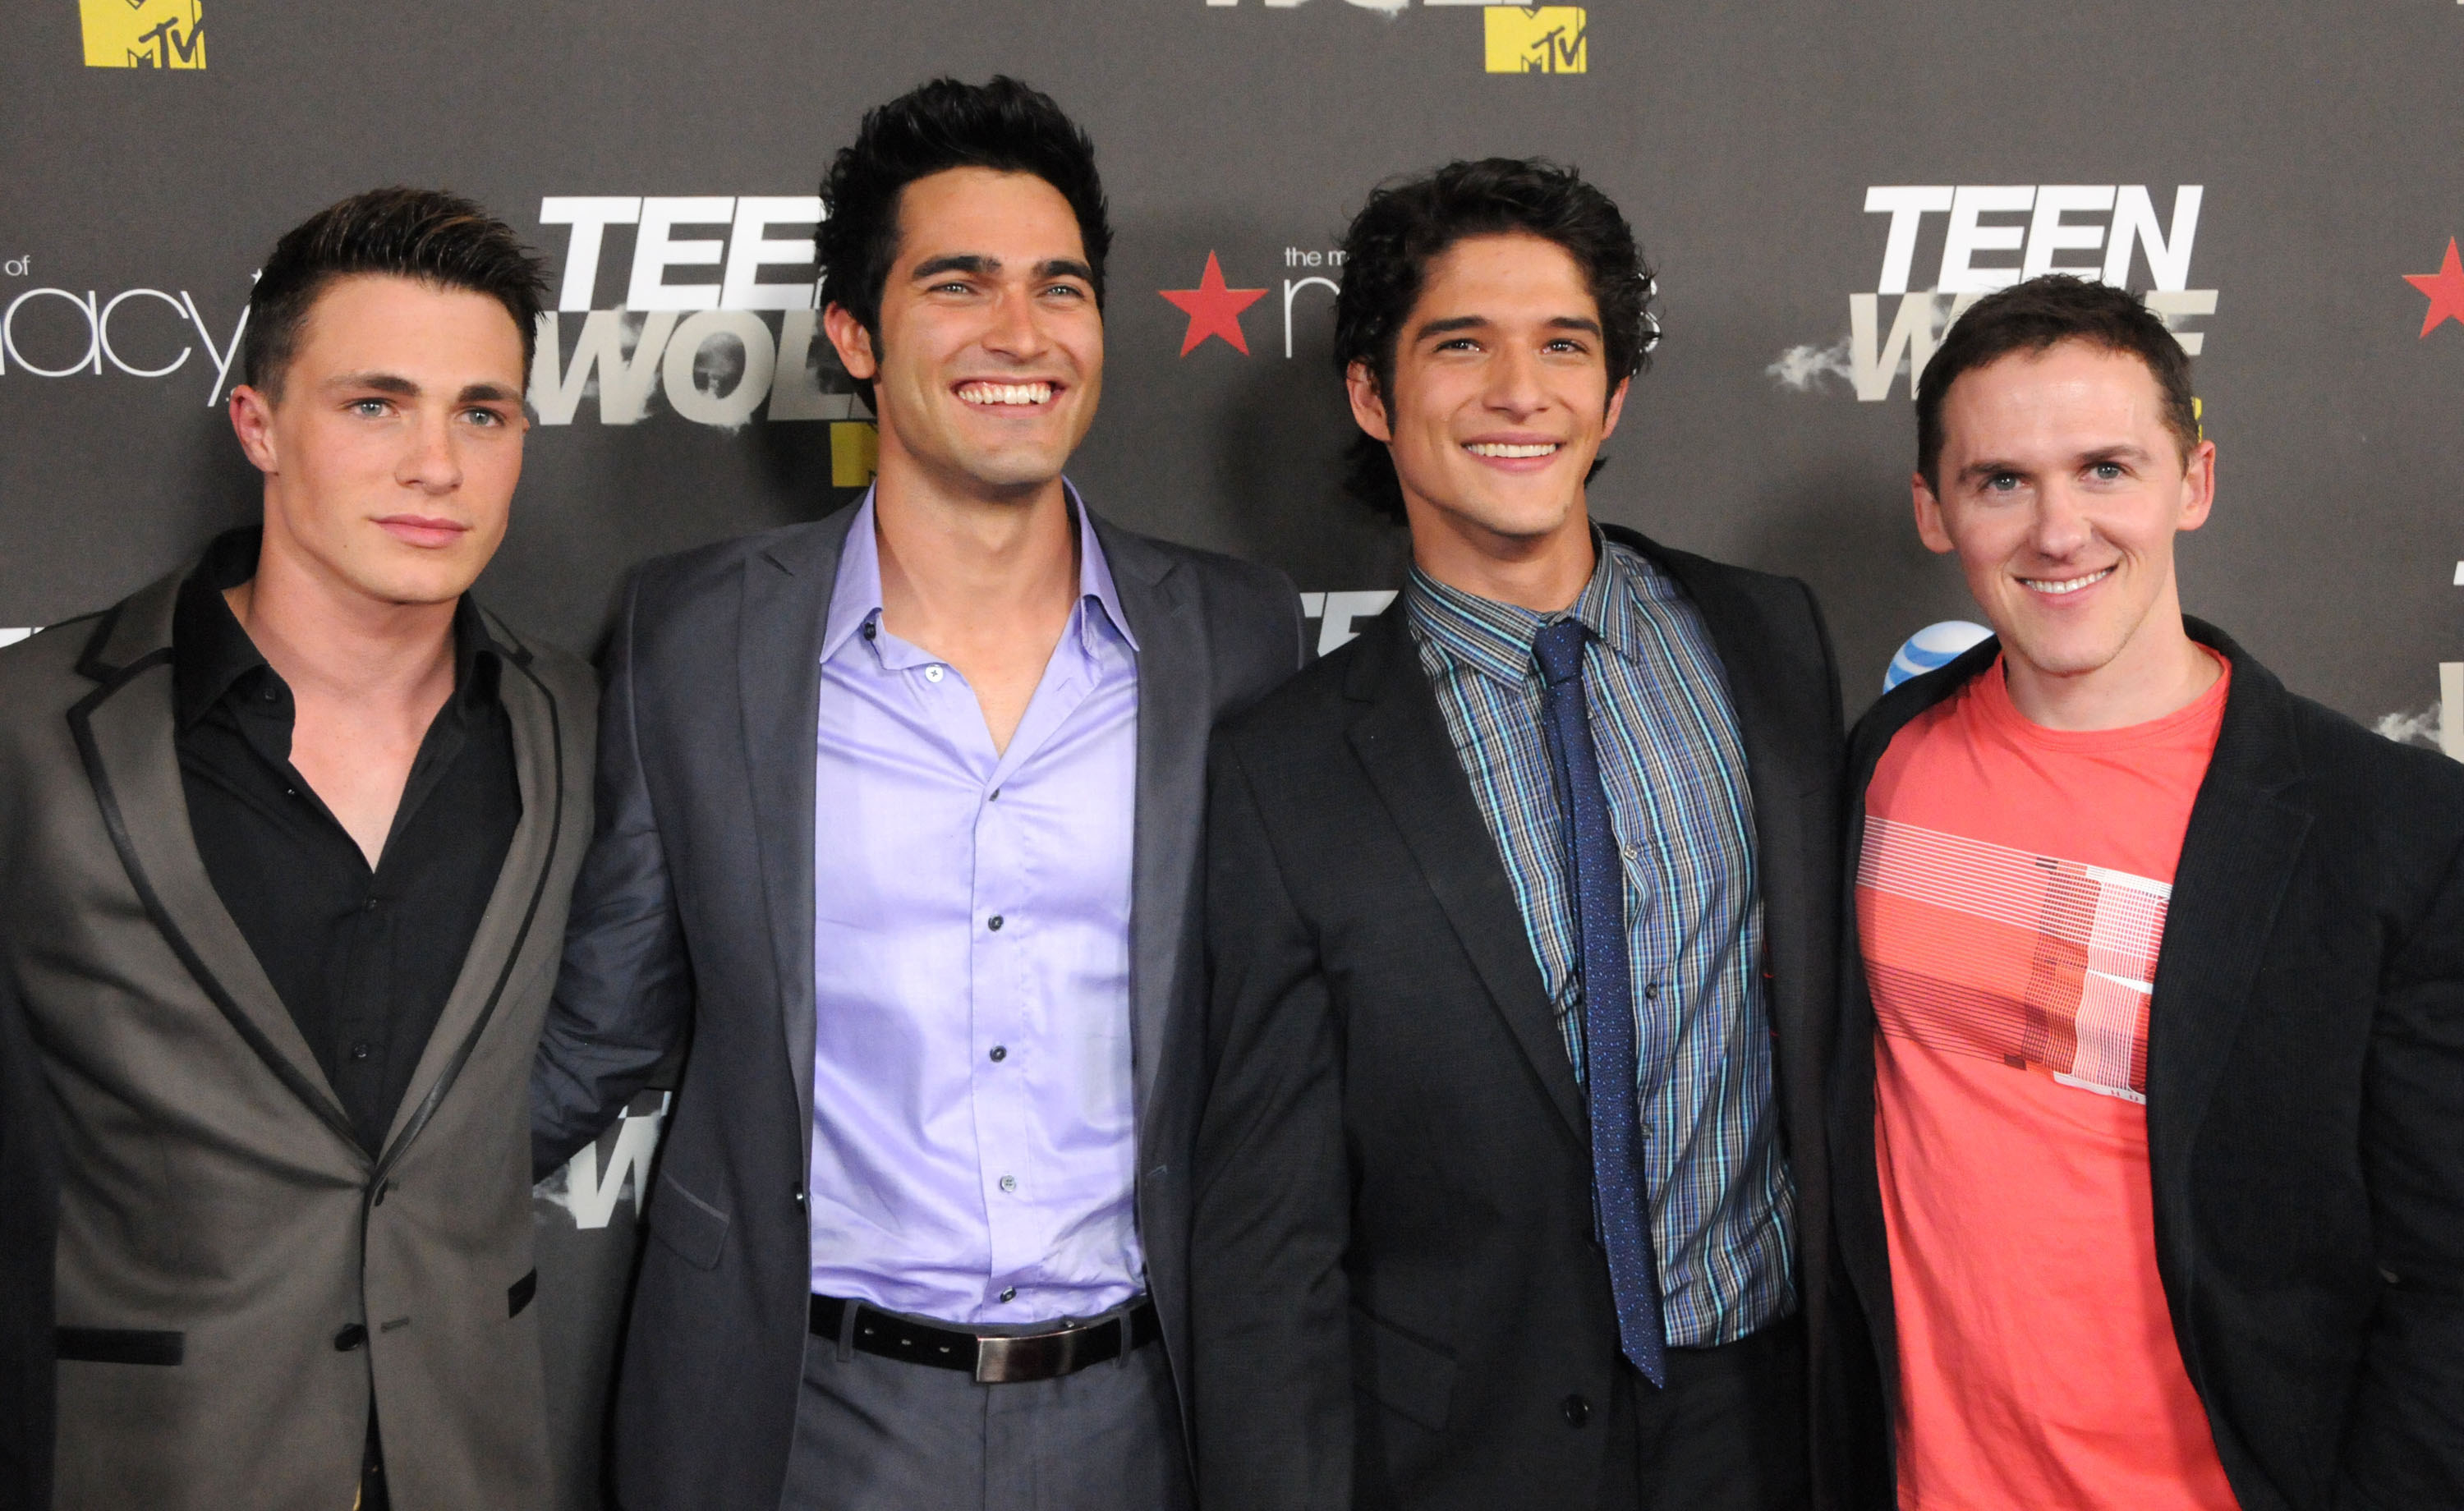 Colton and cast of Teen Wold at a premiere event